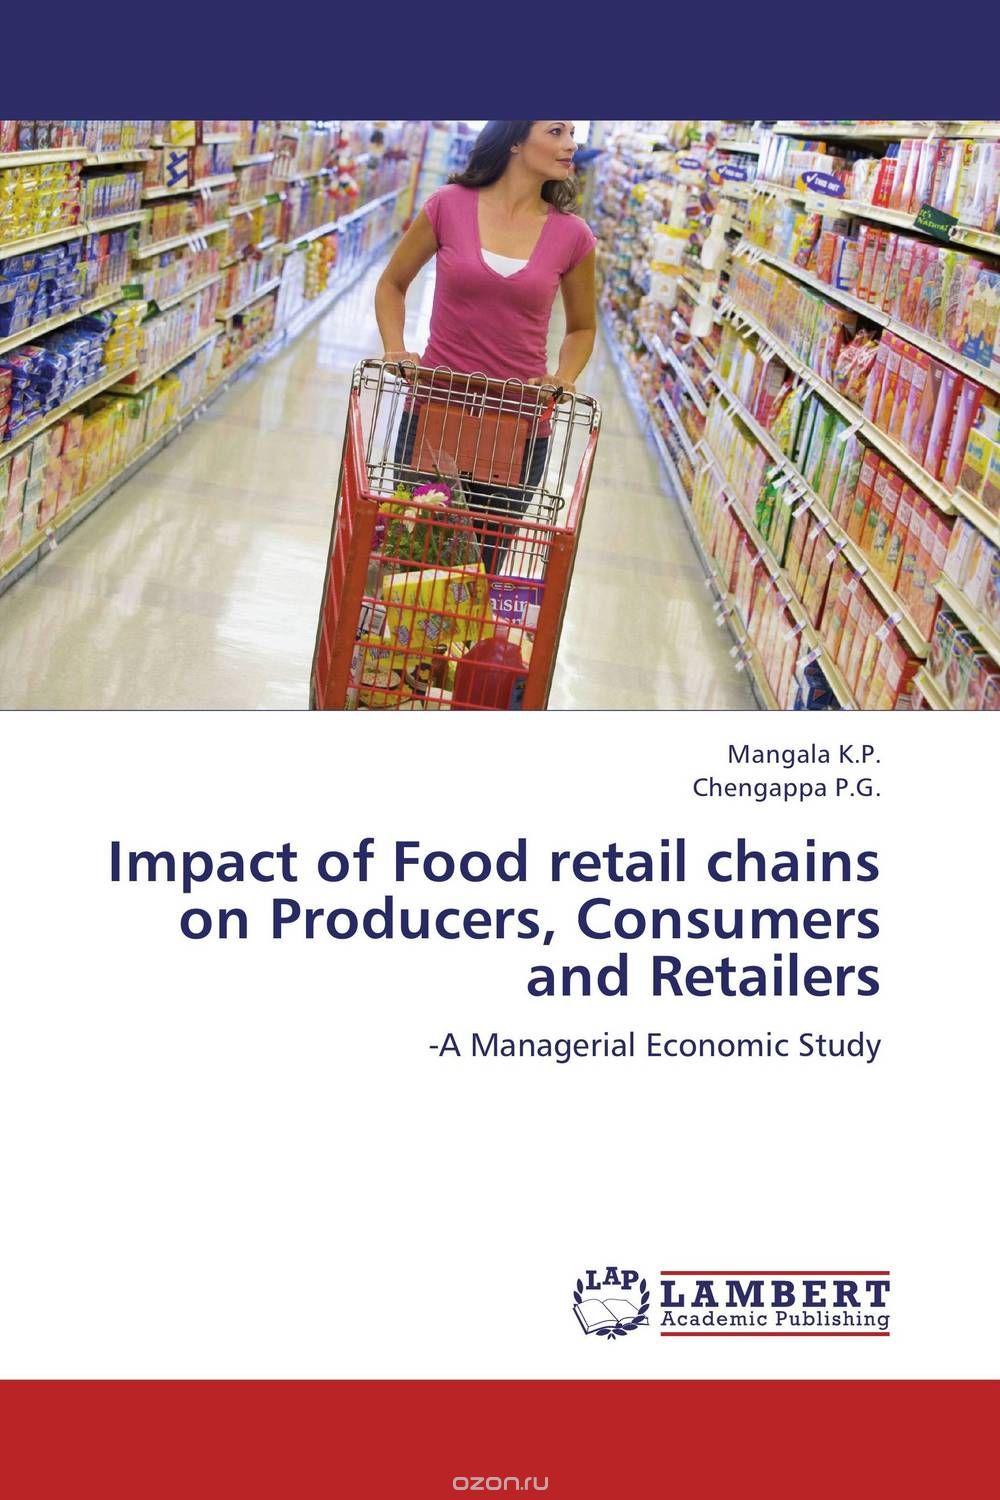 Скачать книгу "Impact of Food retail chains on Producers, Consumers and Retailers"